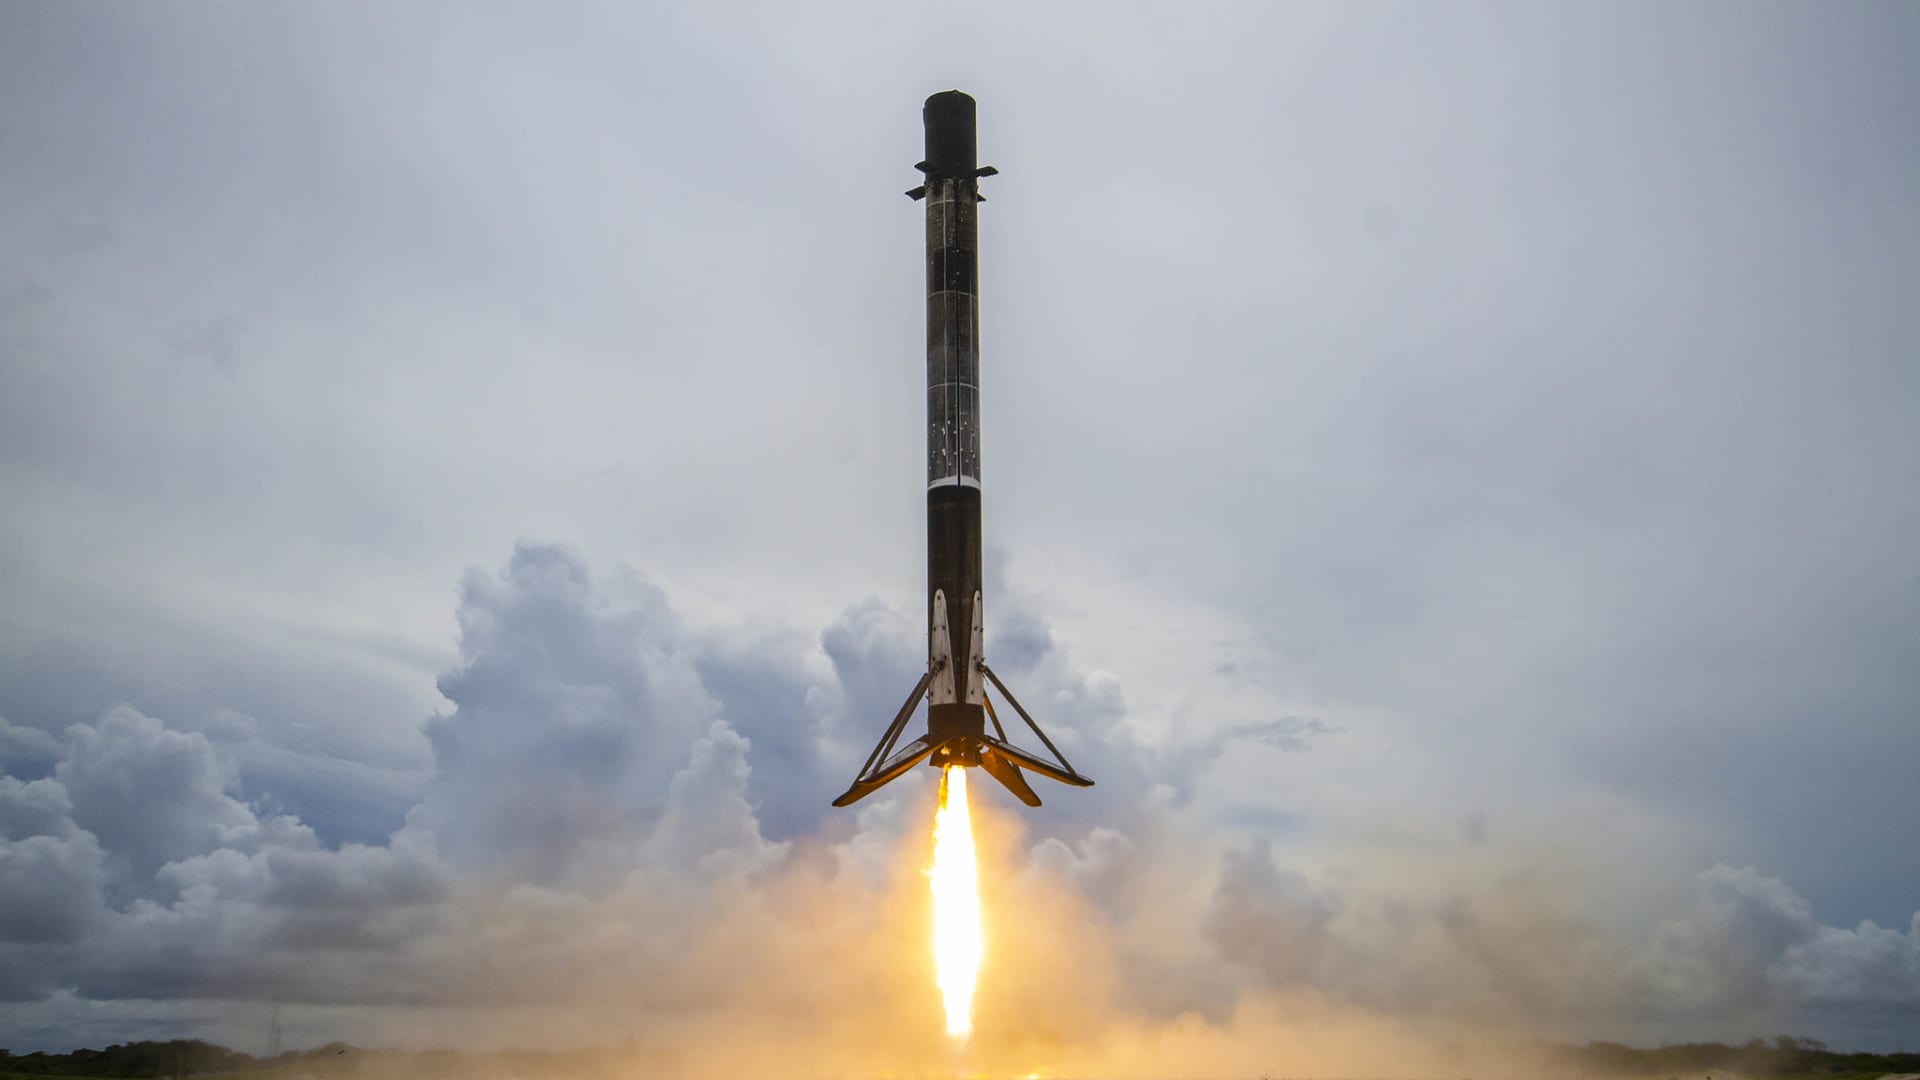 A Falcon 9 rocket booster lands after launching the company's Transporter-2 rideshare mission on June 30, 2021.